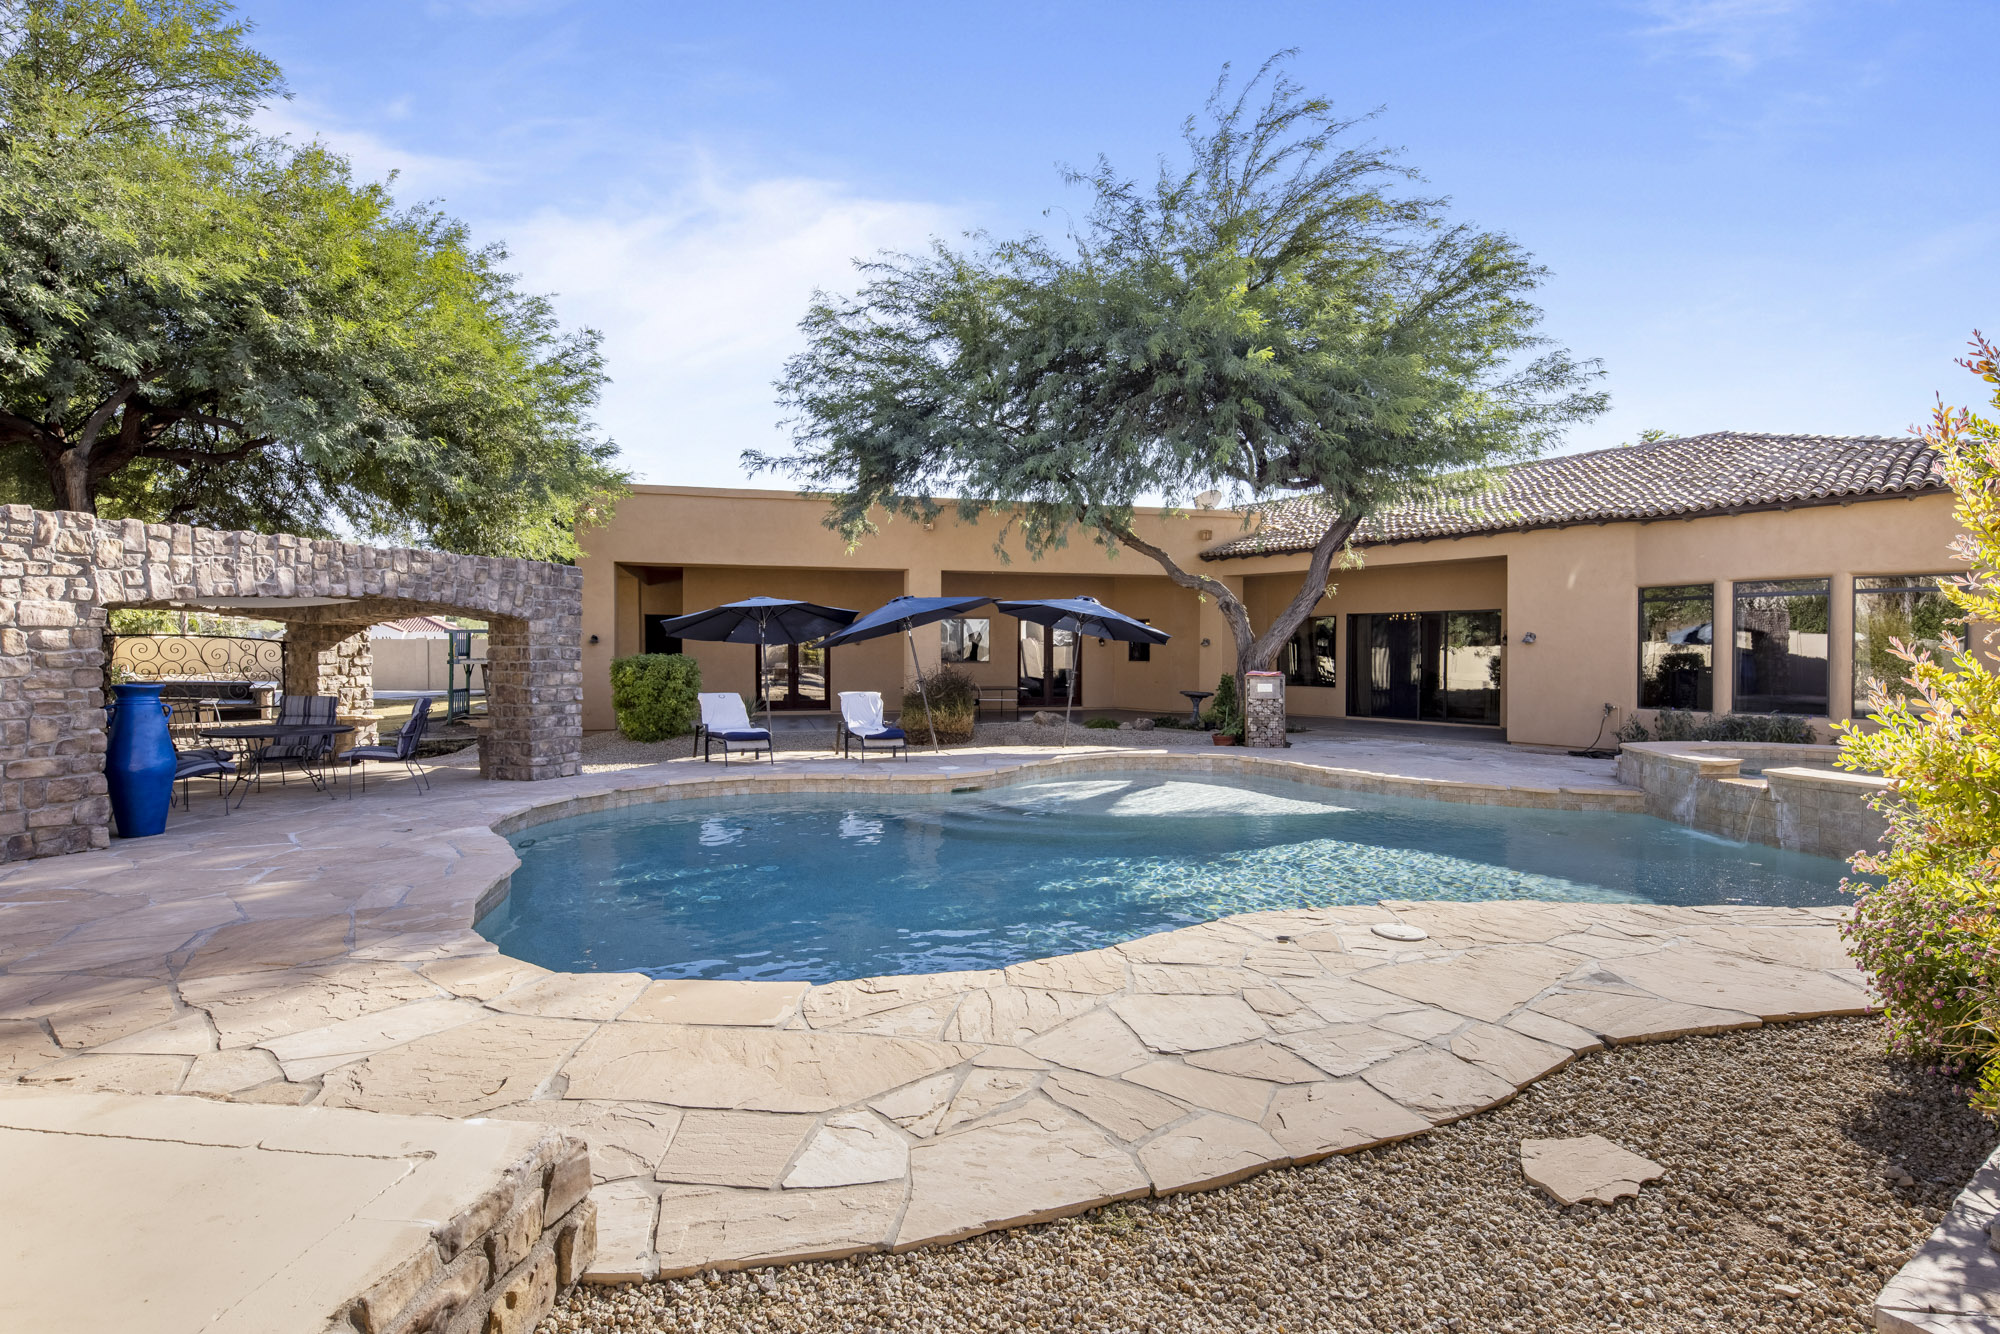 Pool in Goodyear 6 bedroom home for sale